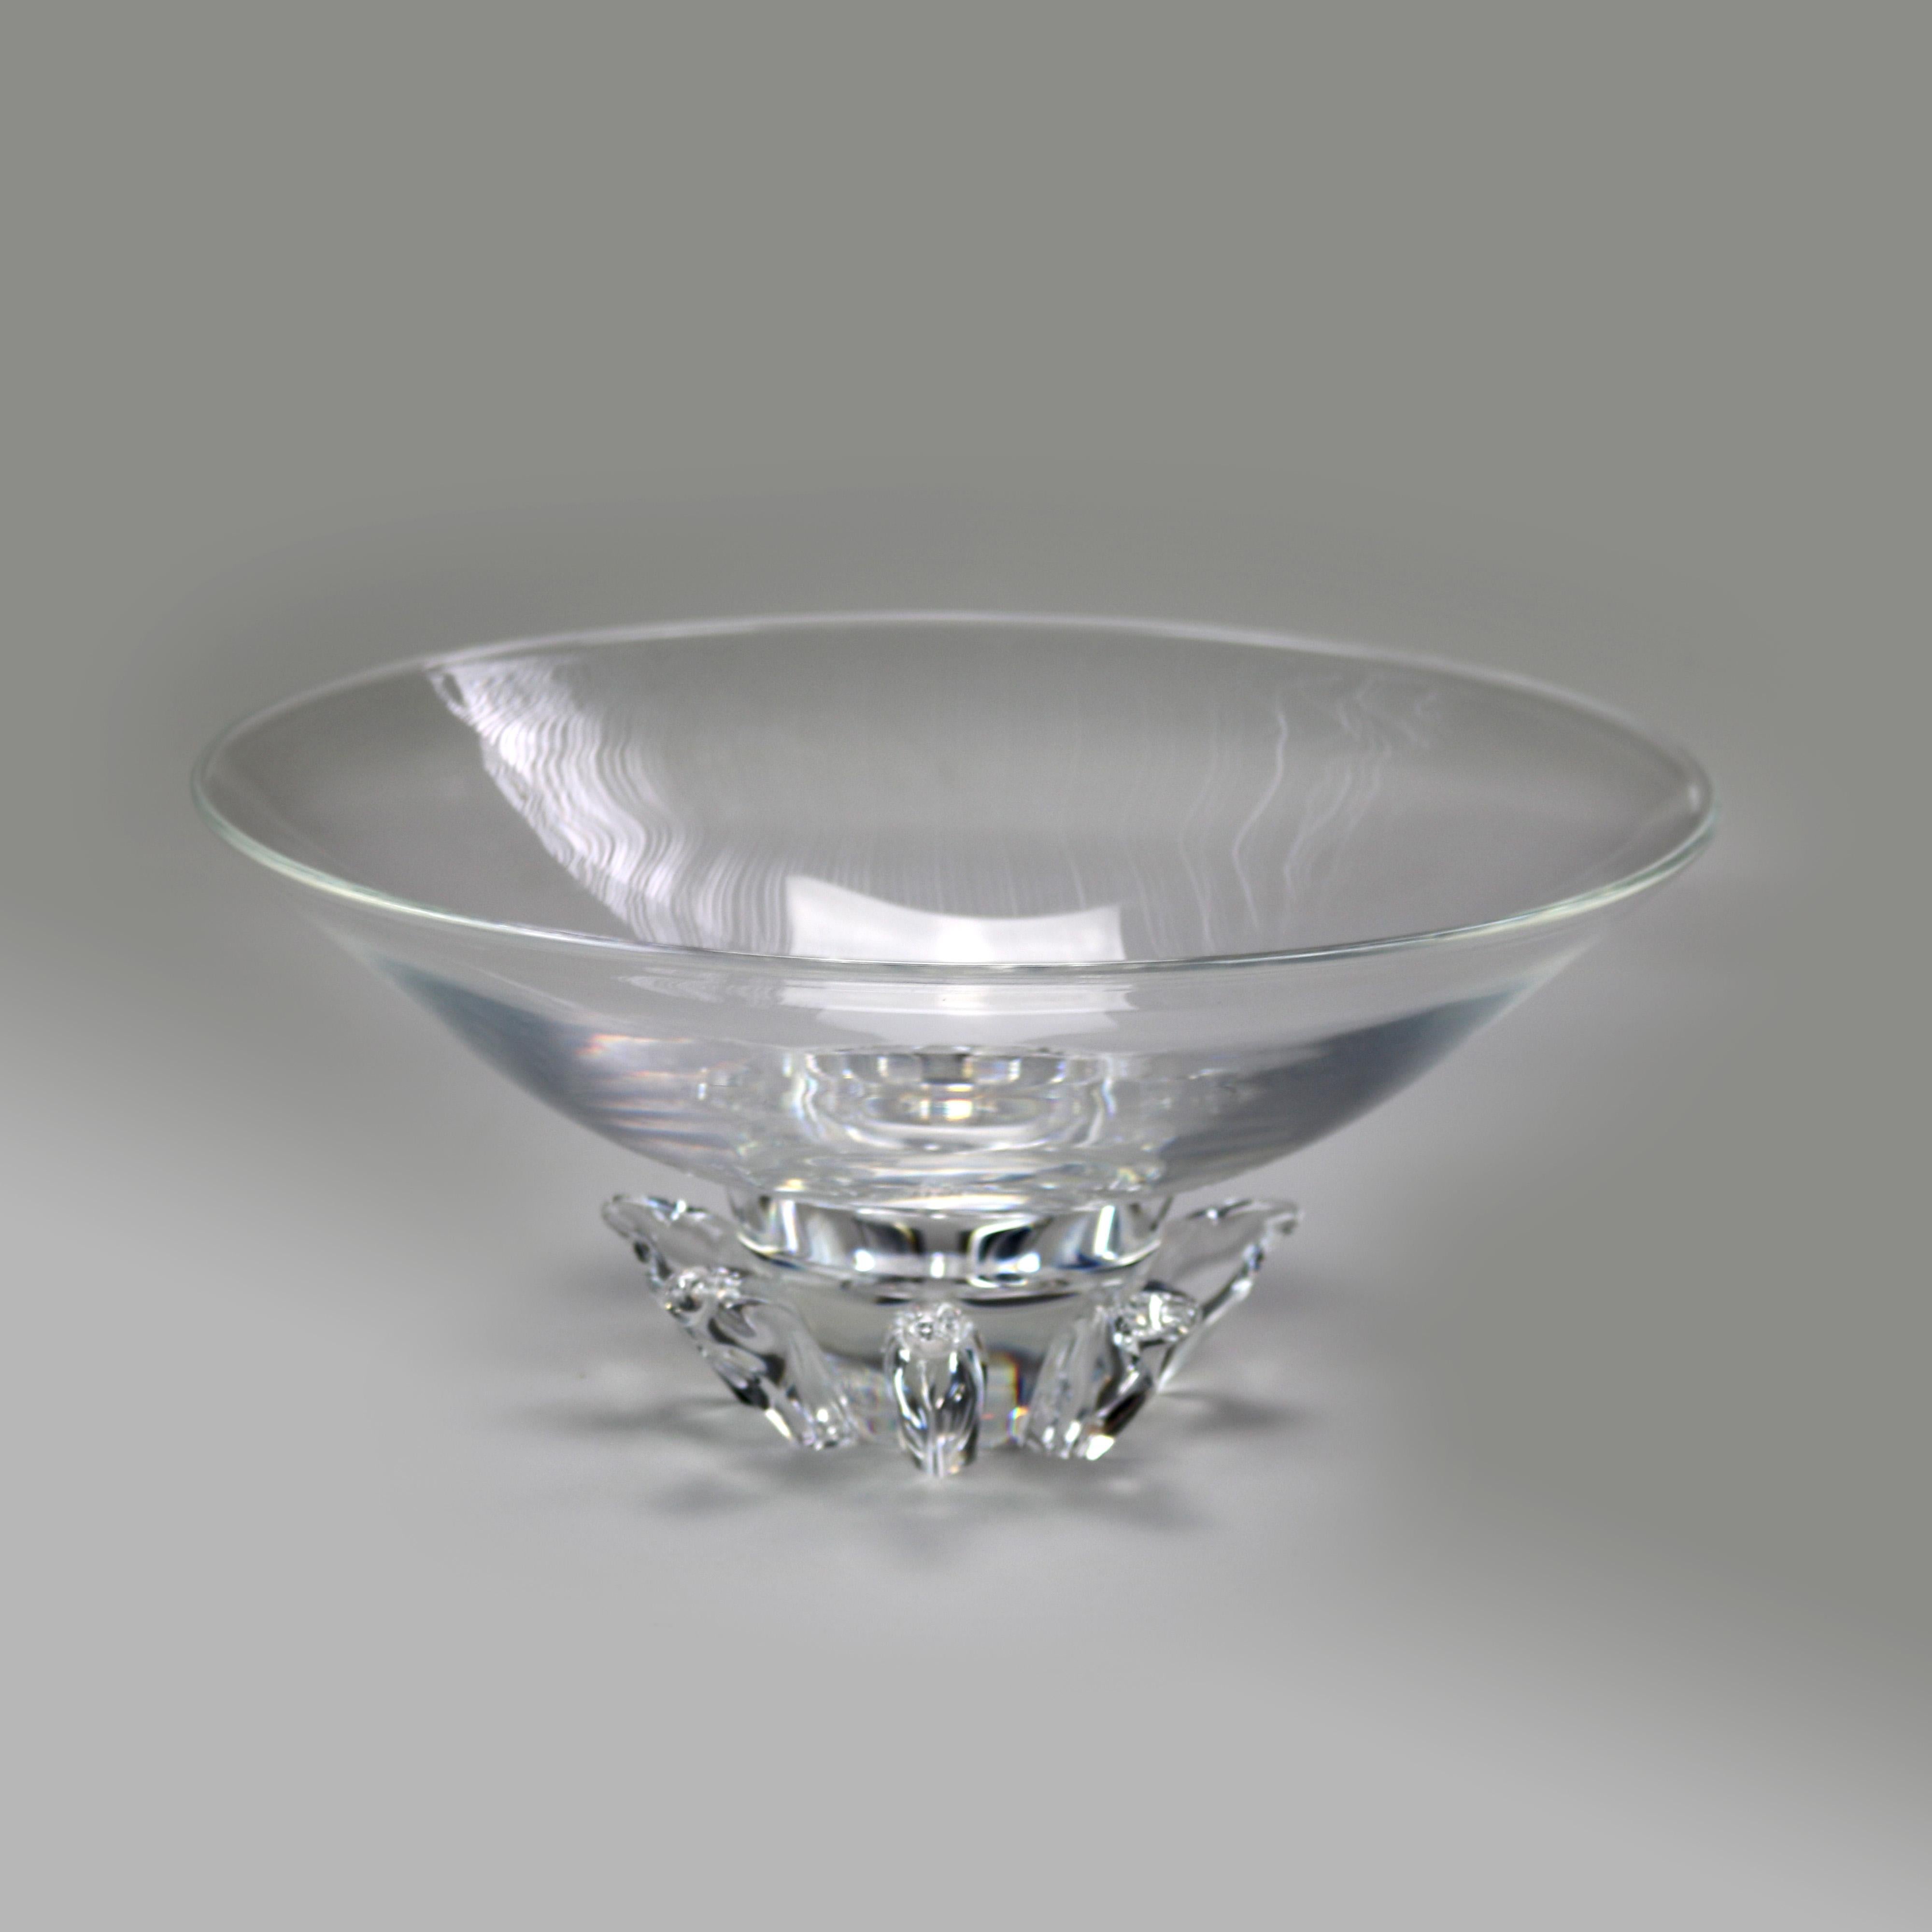 20th Century Large Mid-Century Modern Steuben Art Glass Footed Center Bowl, Signed, c1960